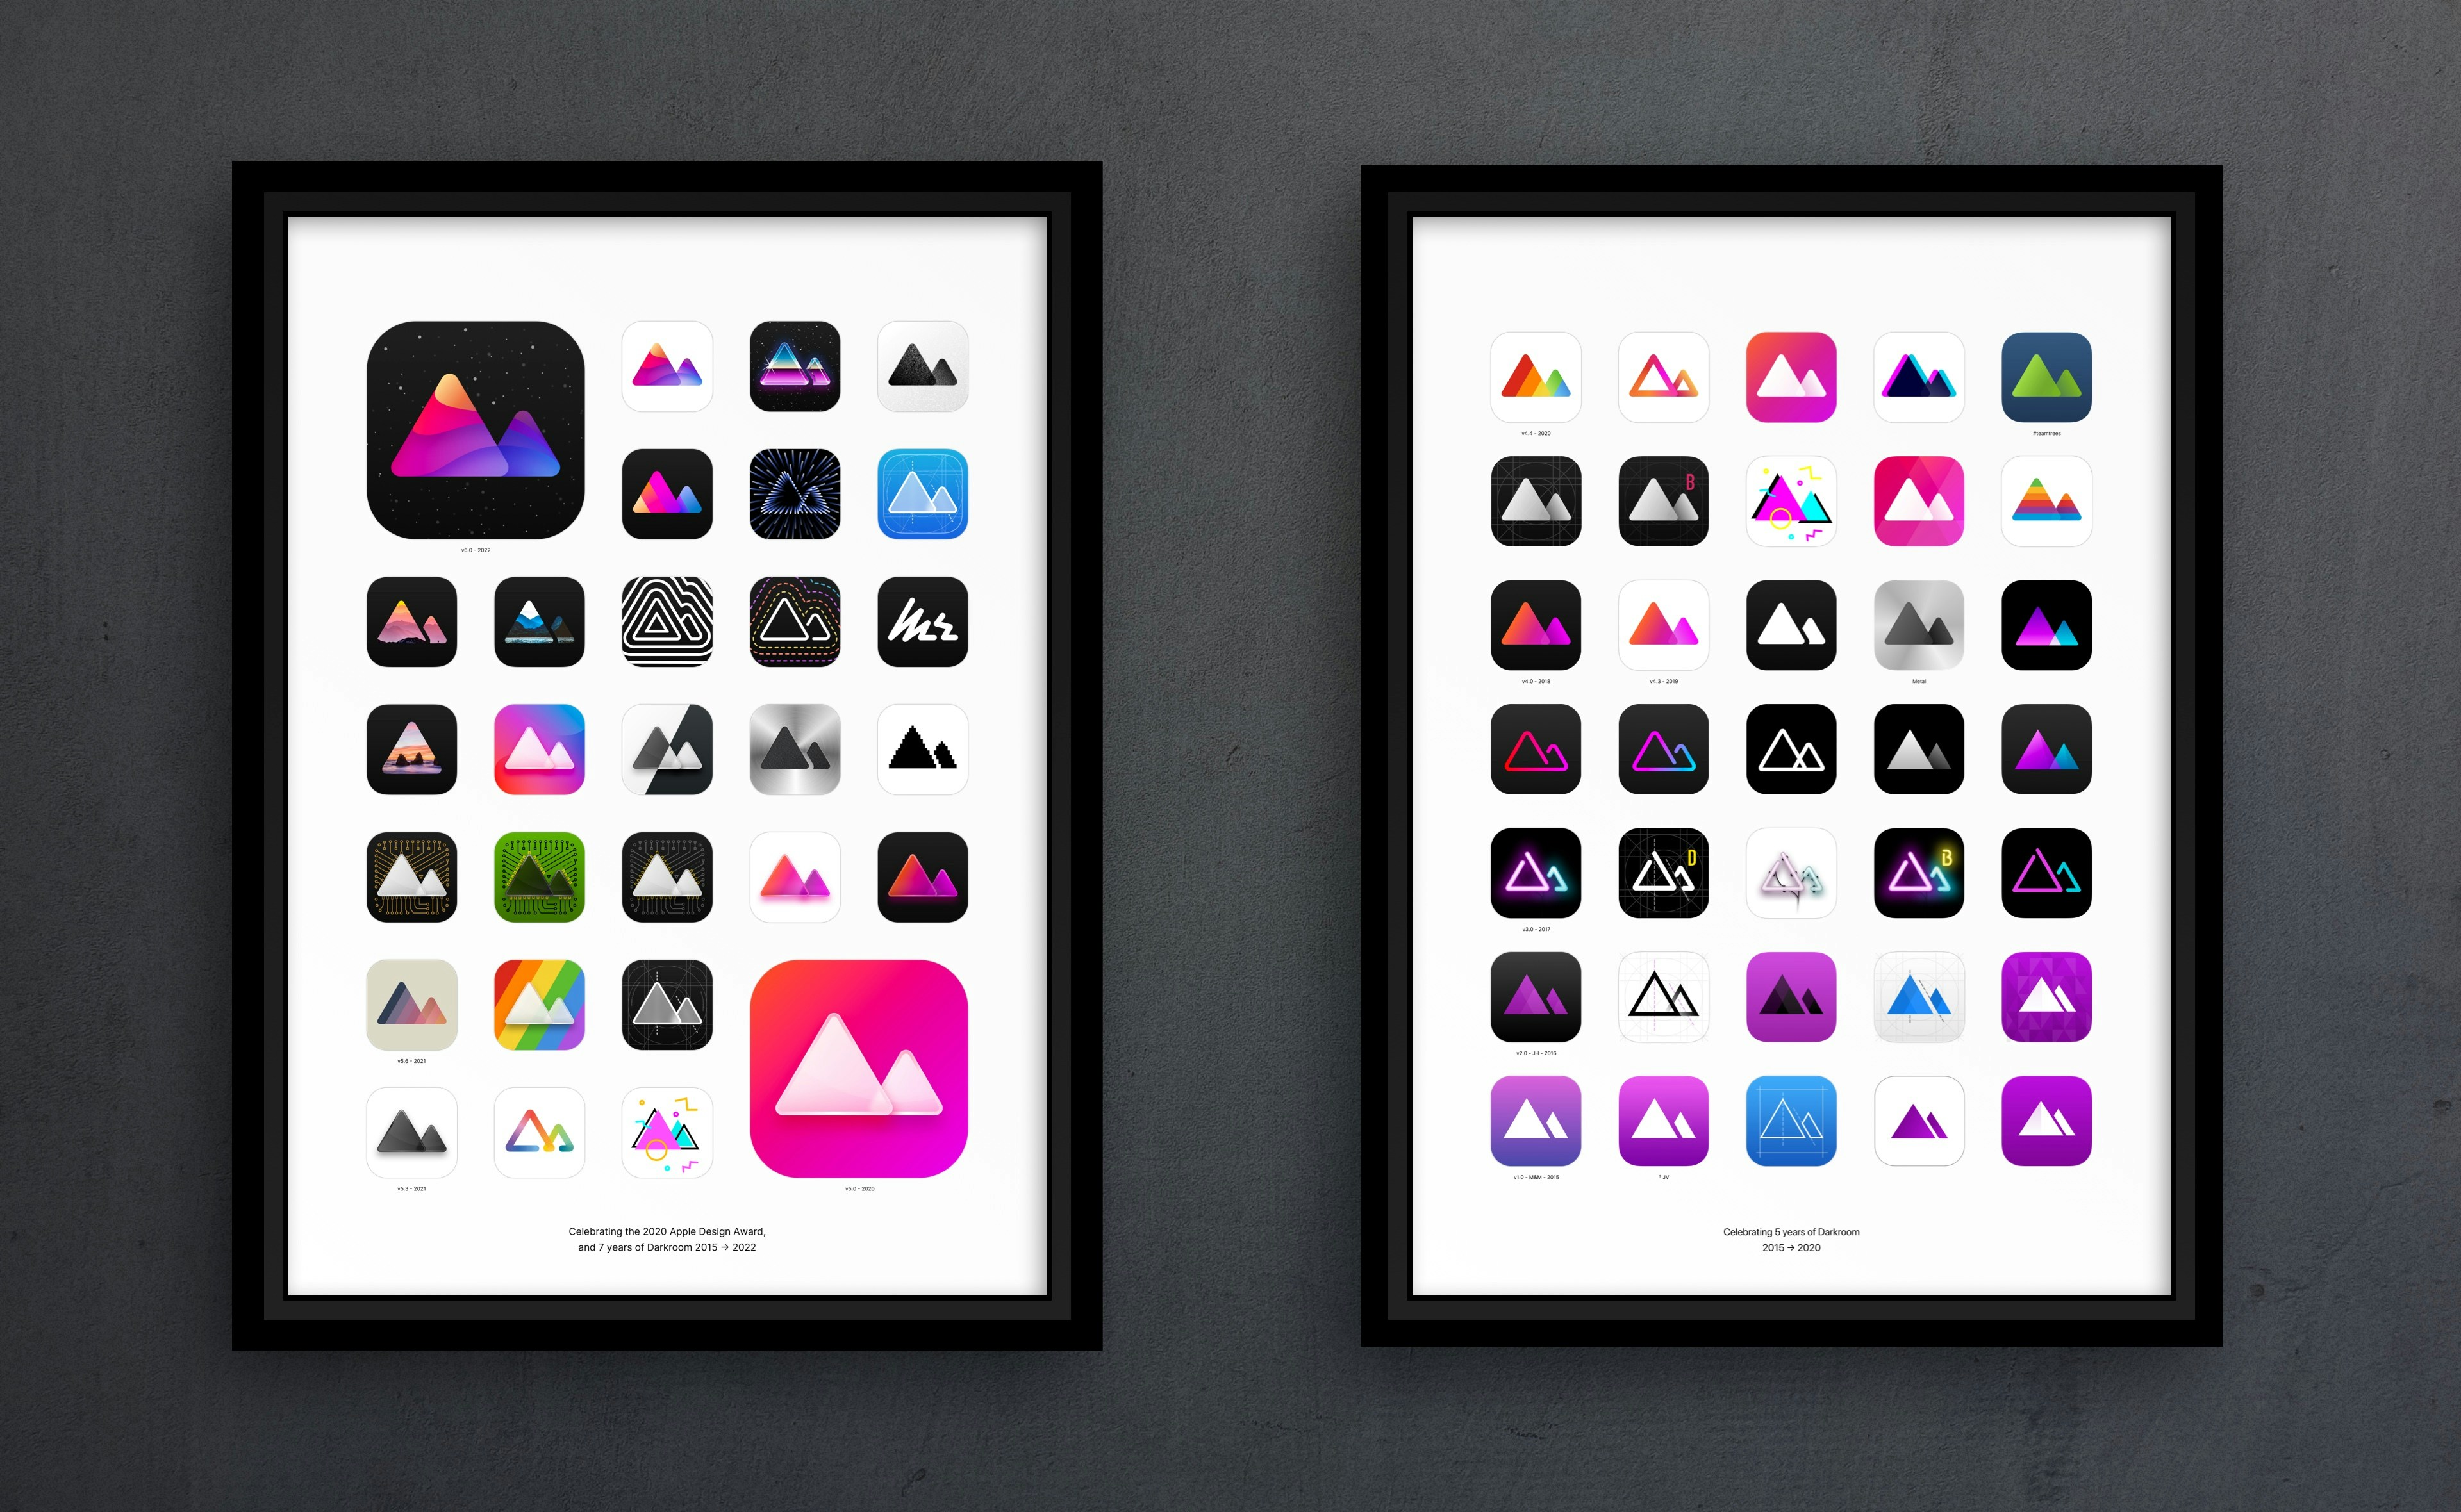 Two posters on a wall side-by-sde, each featuring a large selection of released and unreleased app icons